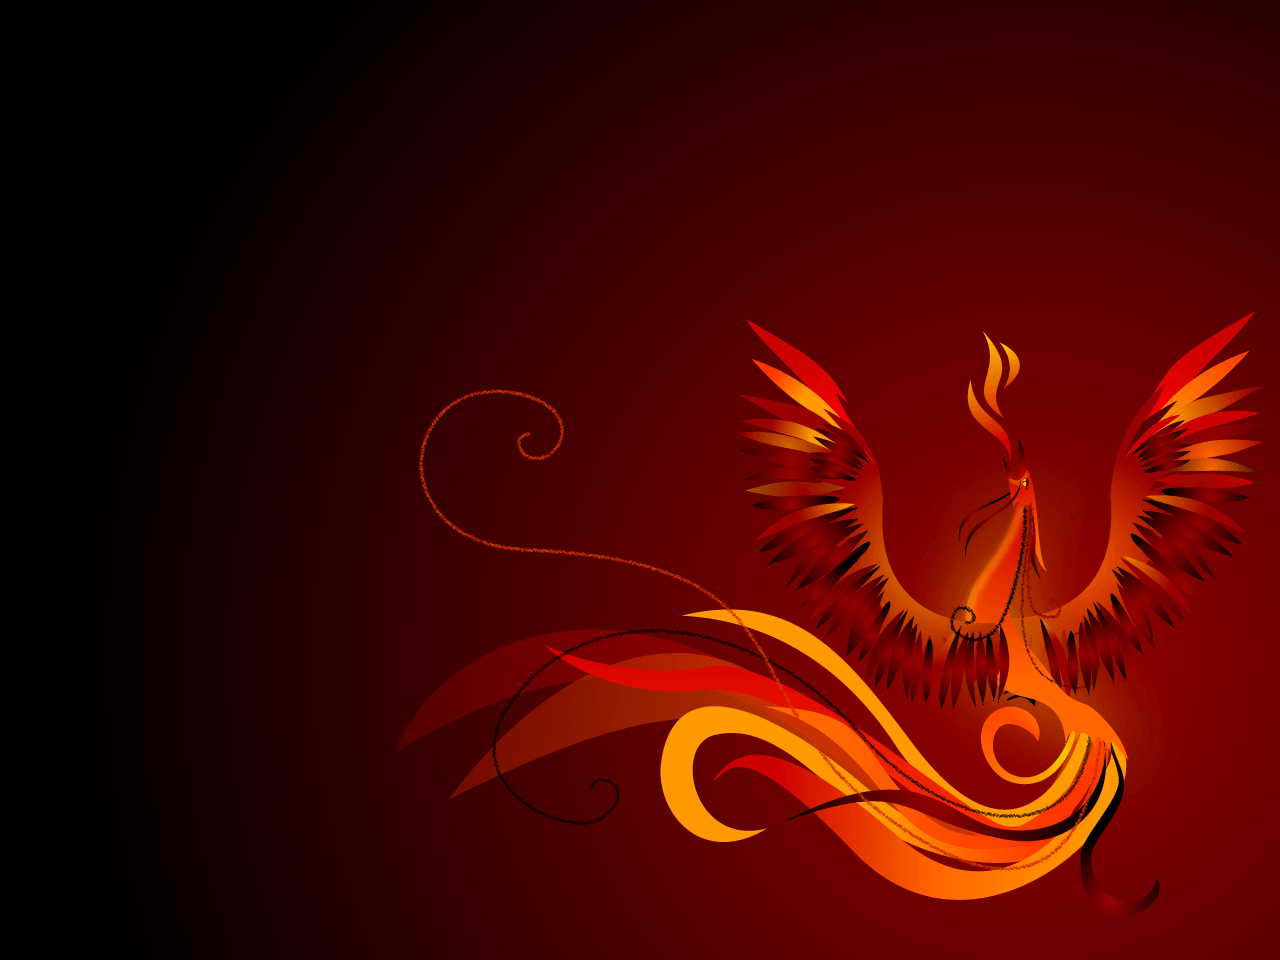 Phoenix Wallpaper, HD Phoenix Wallpaper. Phoenix Best Pics Collection